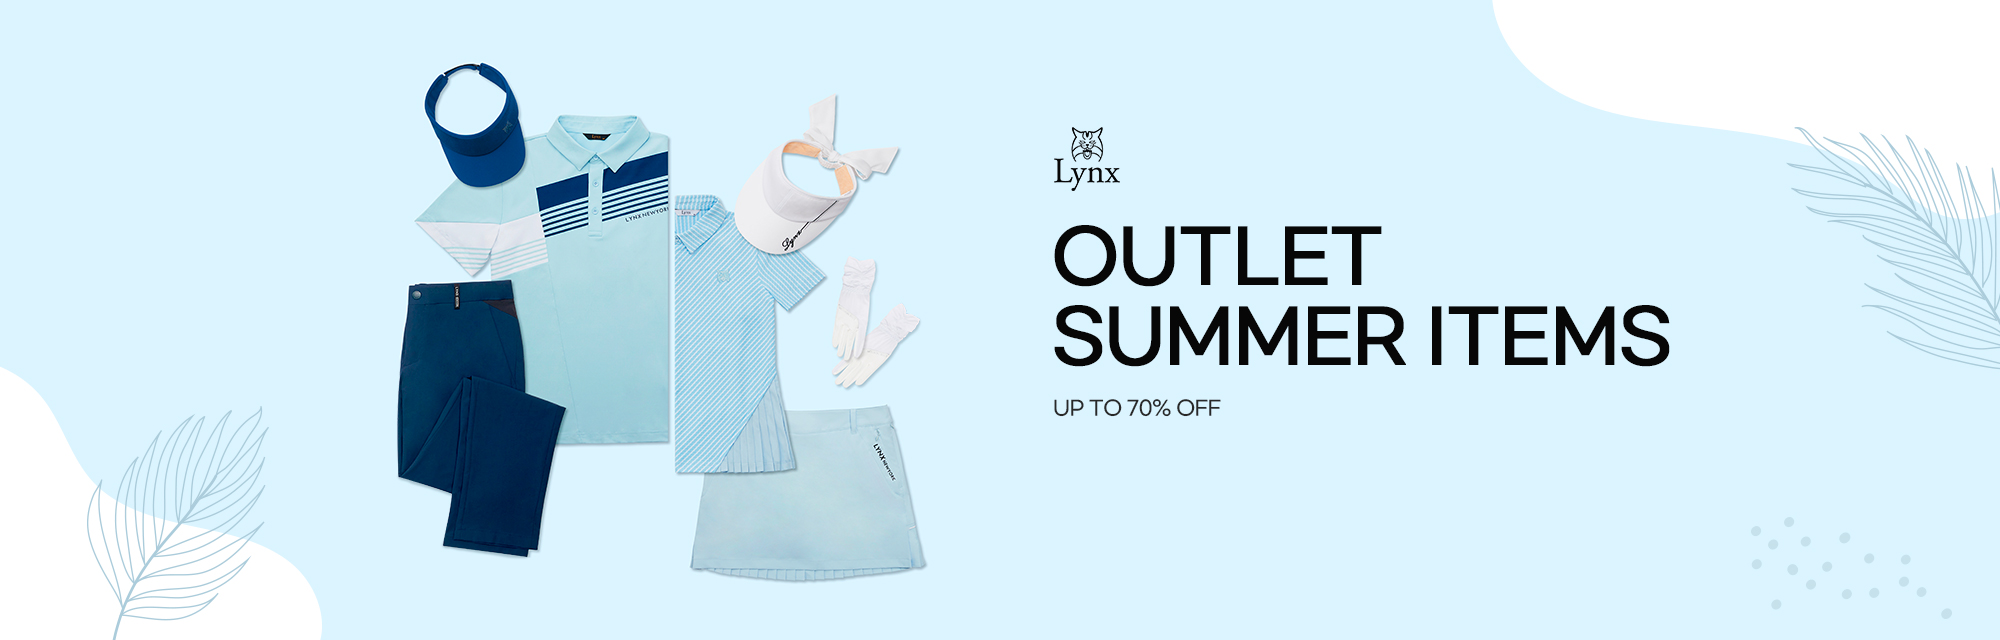 OUTLET SUMMER ITEMS